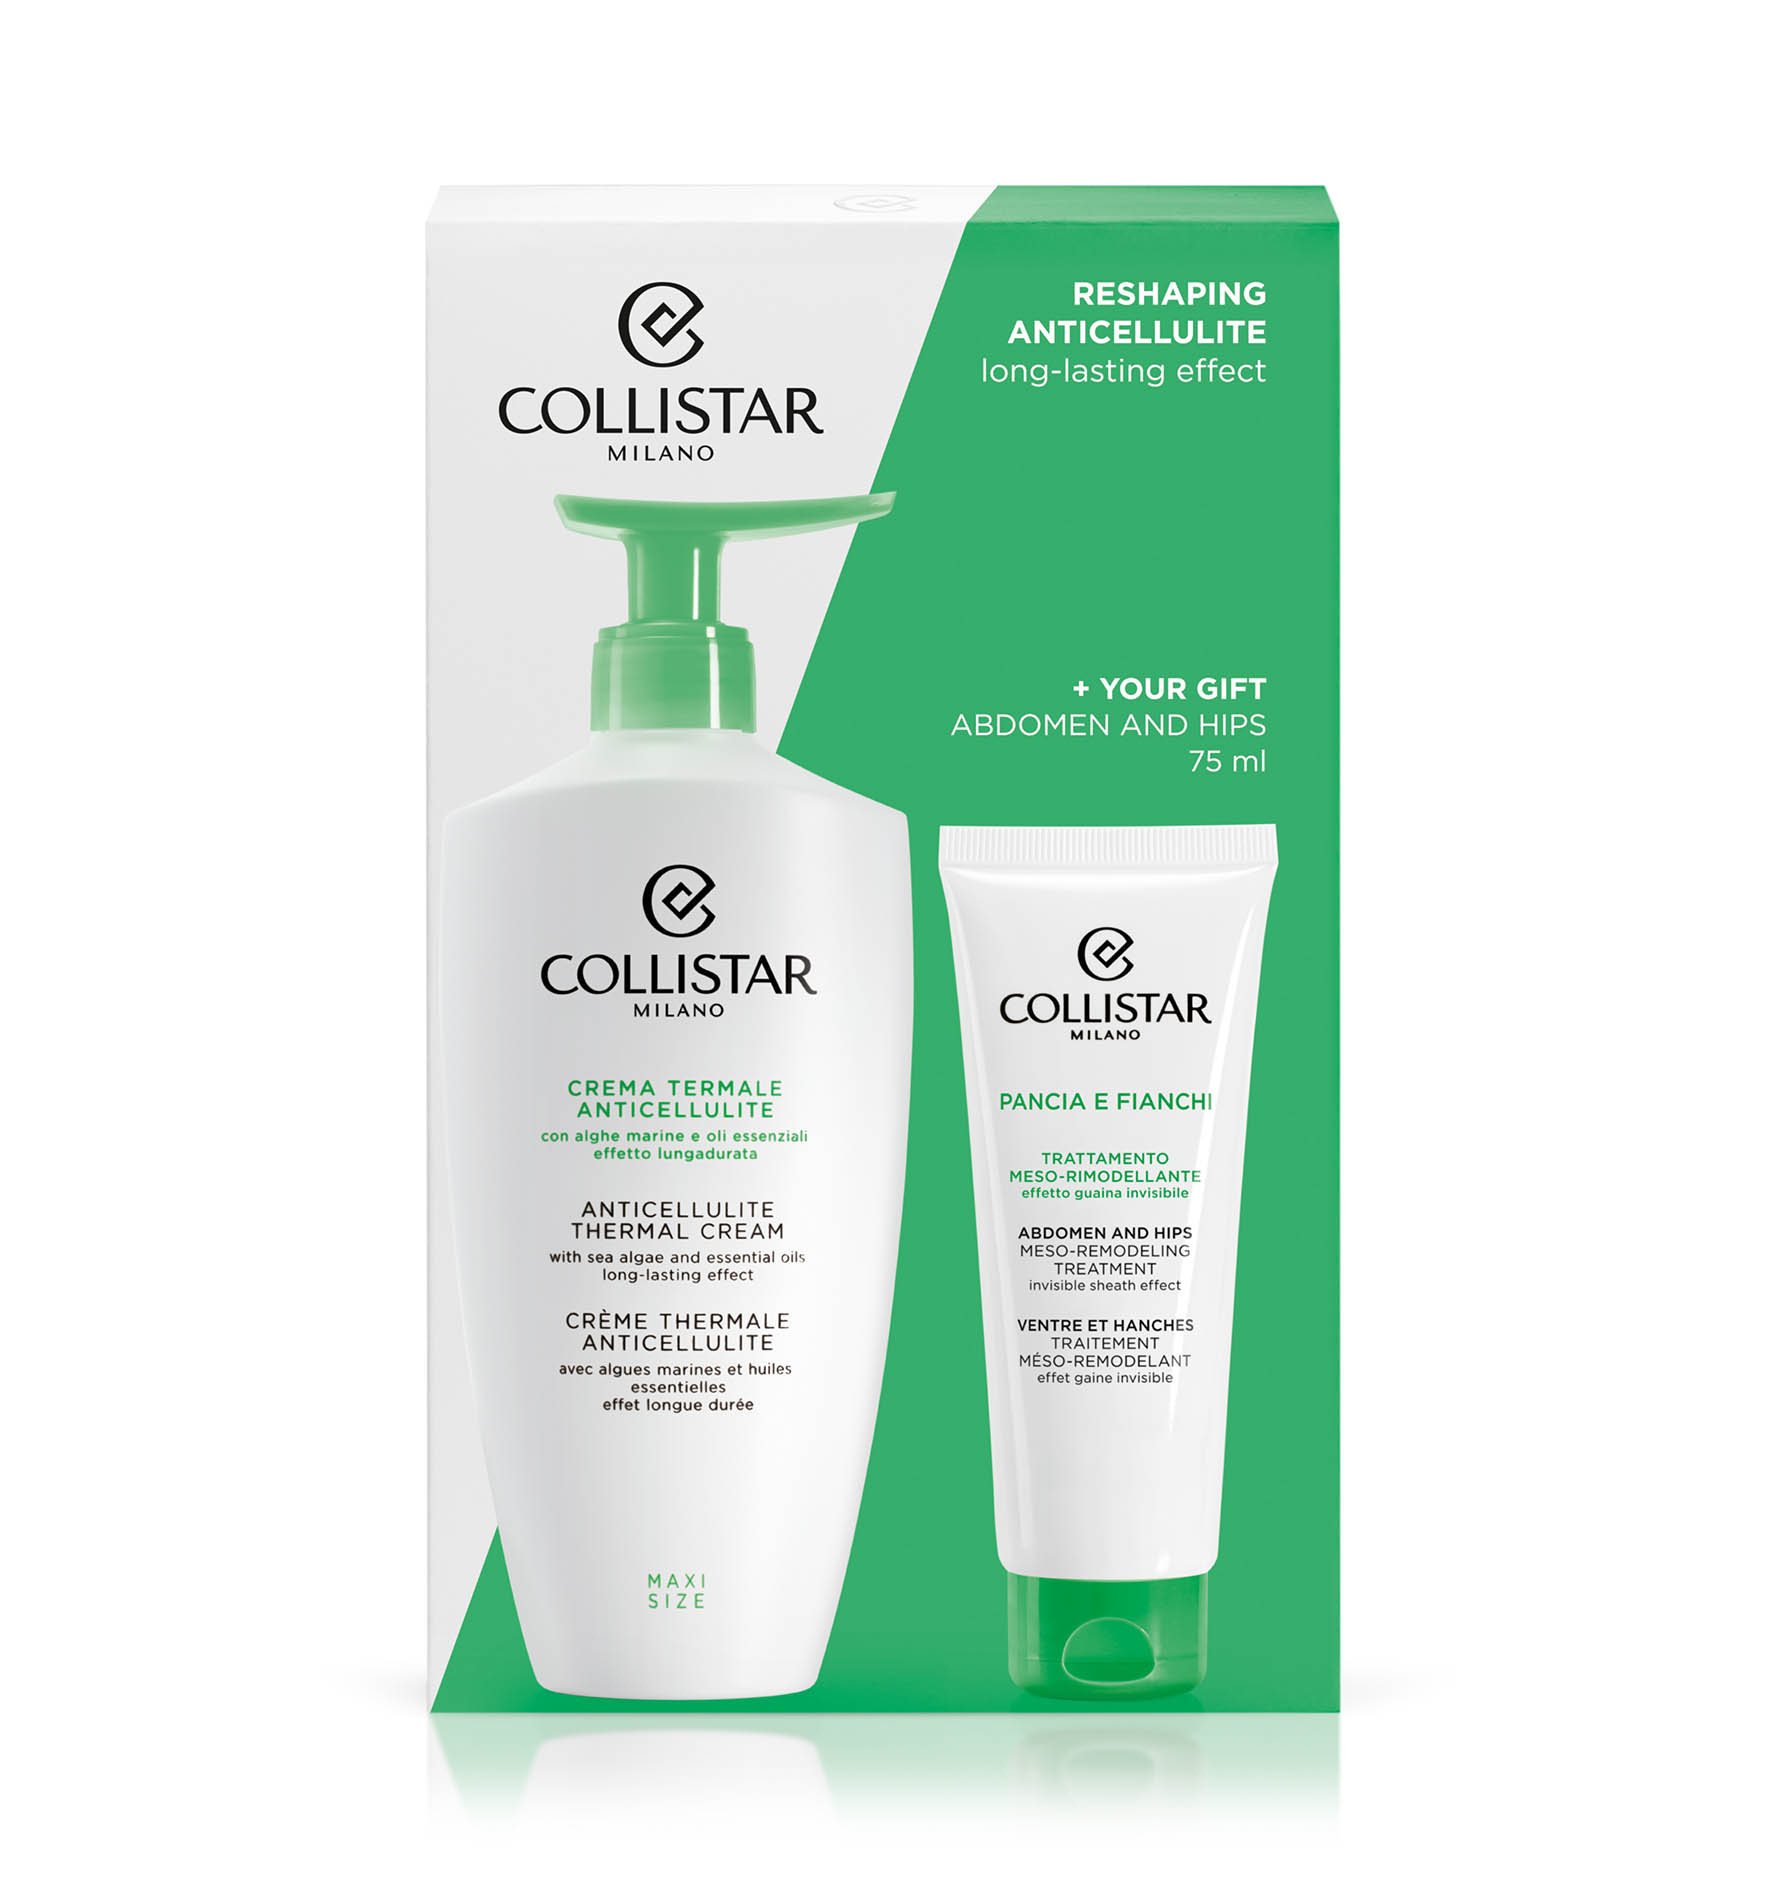 SET RESHAPING ANTICELLULITE long-lasting effect - BODY | Collistar - Shop Online Ufficiale